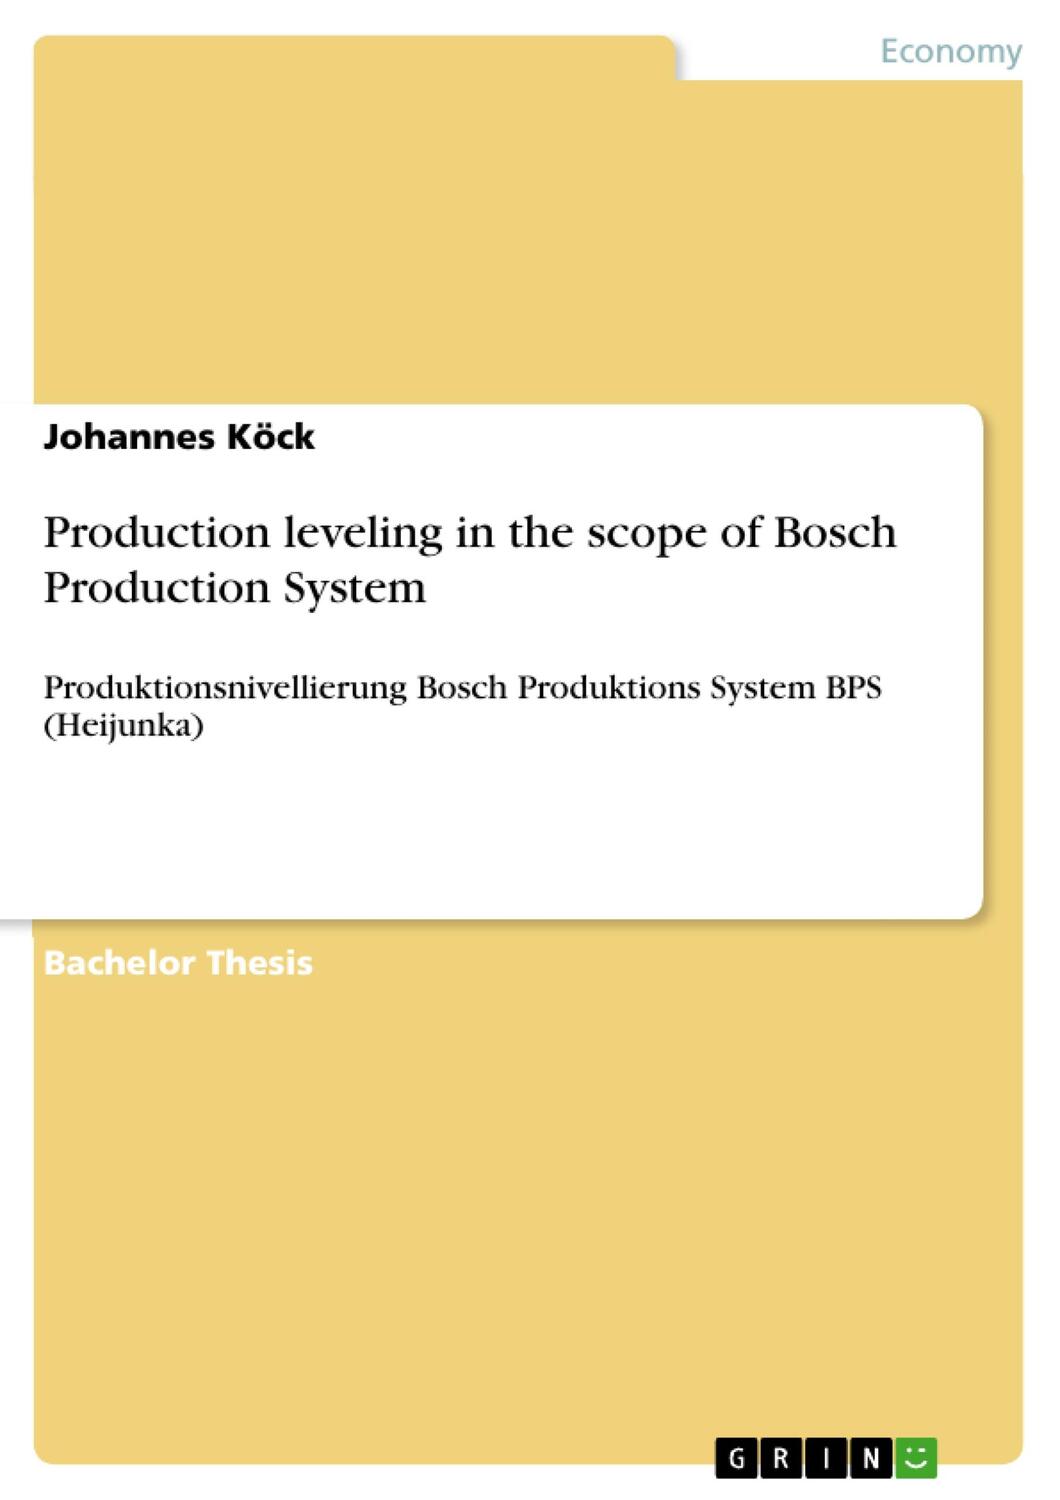 Cover: 9783668554948 | Production leveling in the scope of Bosch Production System | Köck